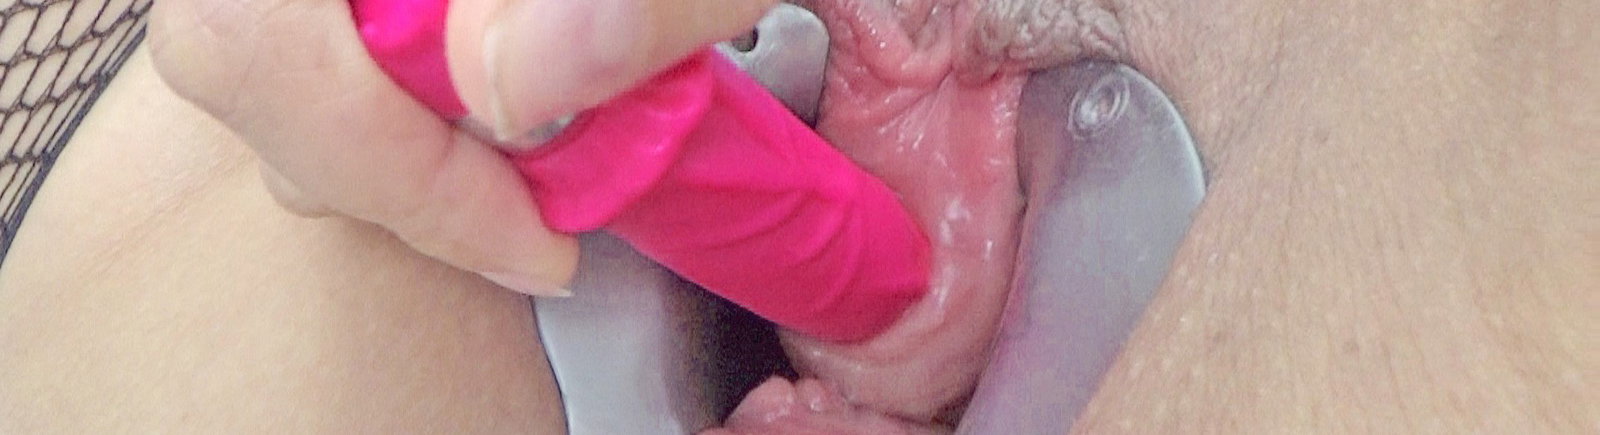 Watch the Photo by Extreme Porn Videos with the username @extremepornvideos, posted on October 28, 2019 and the text says '#peehole #sounding #pisshole #dildo #extreme #probe #sound https://www.videoshorny.com'